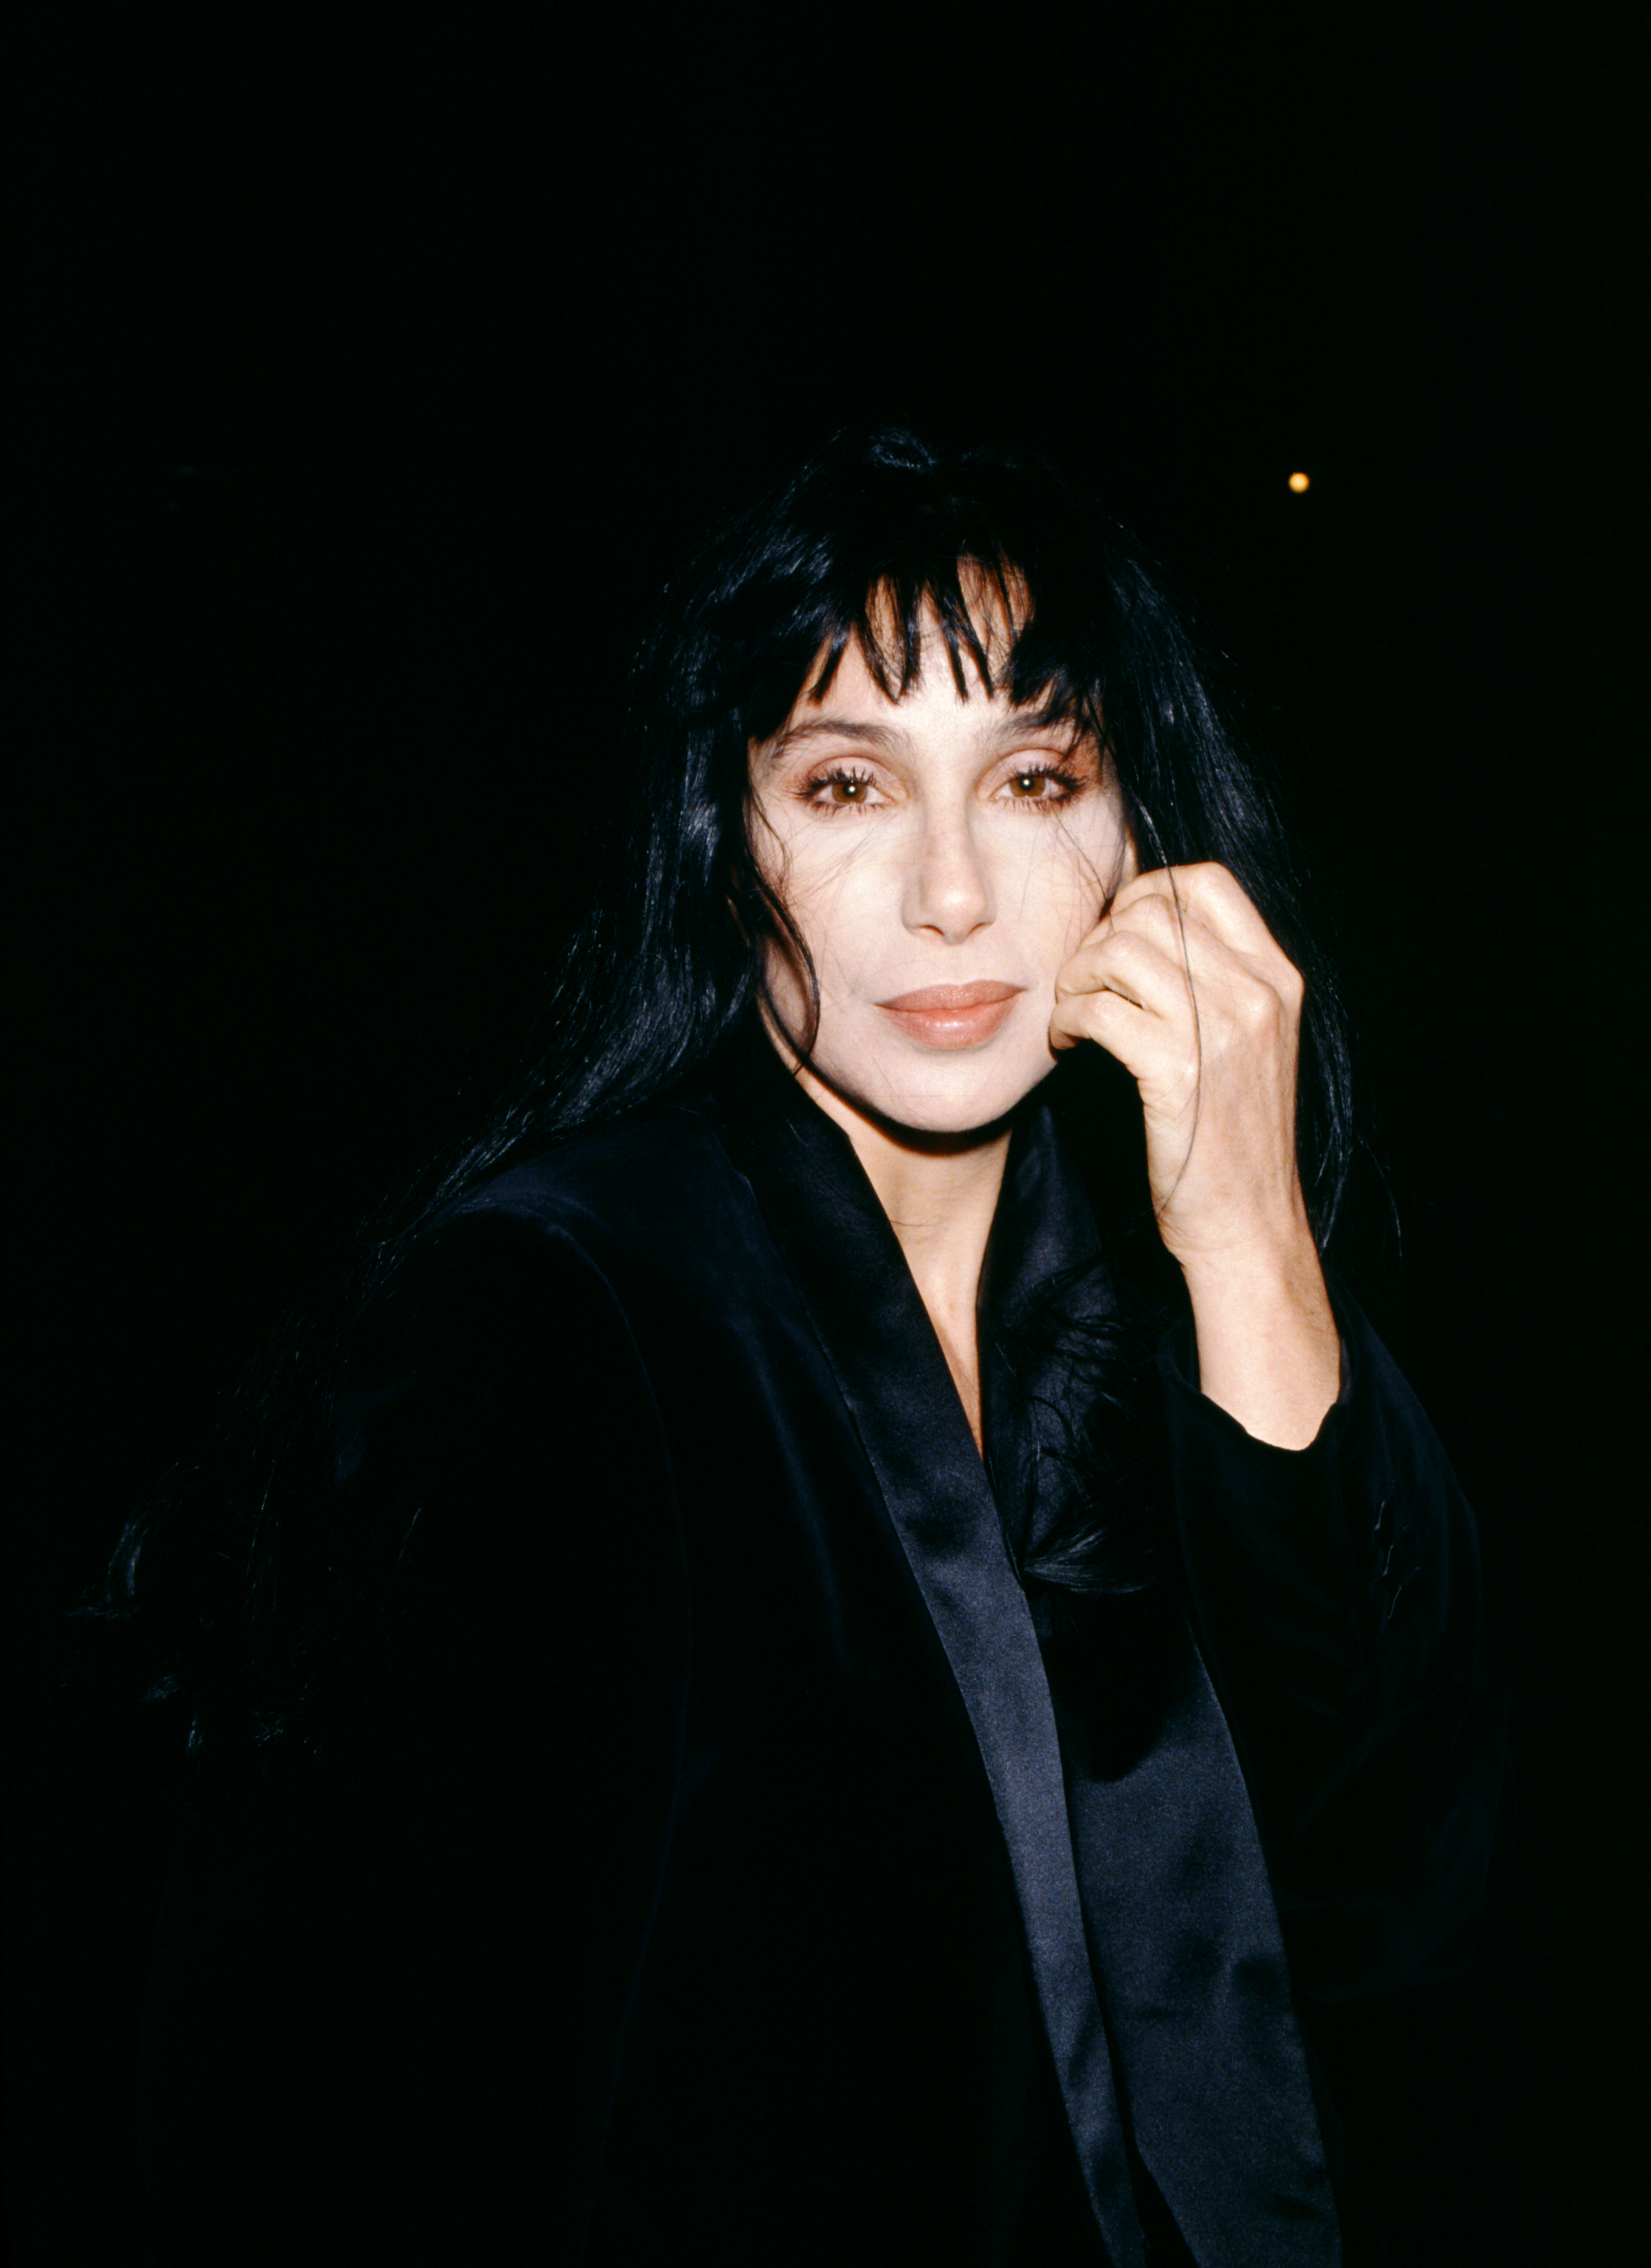 Cher attends the 5th Annual Fire and Ice Ball to Benefit Revlon UCLA Women Cancer Center in Century City, California on December 7, 1994. | Source: Getty Images